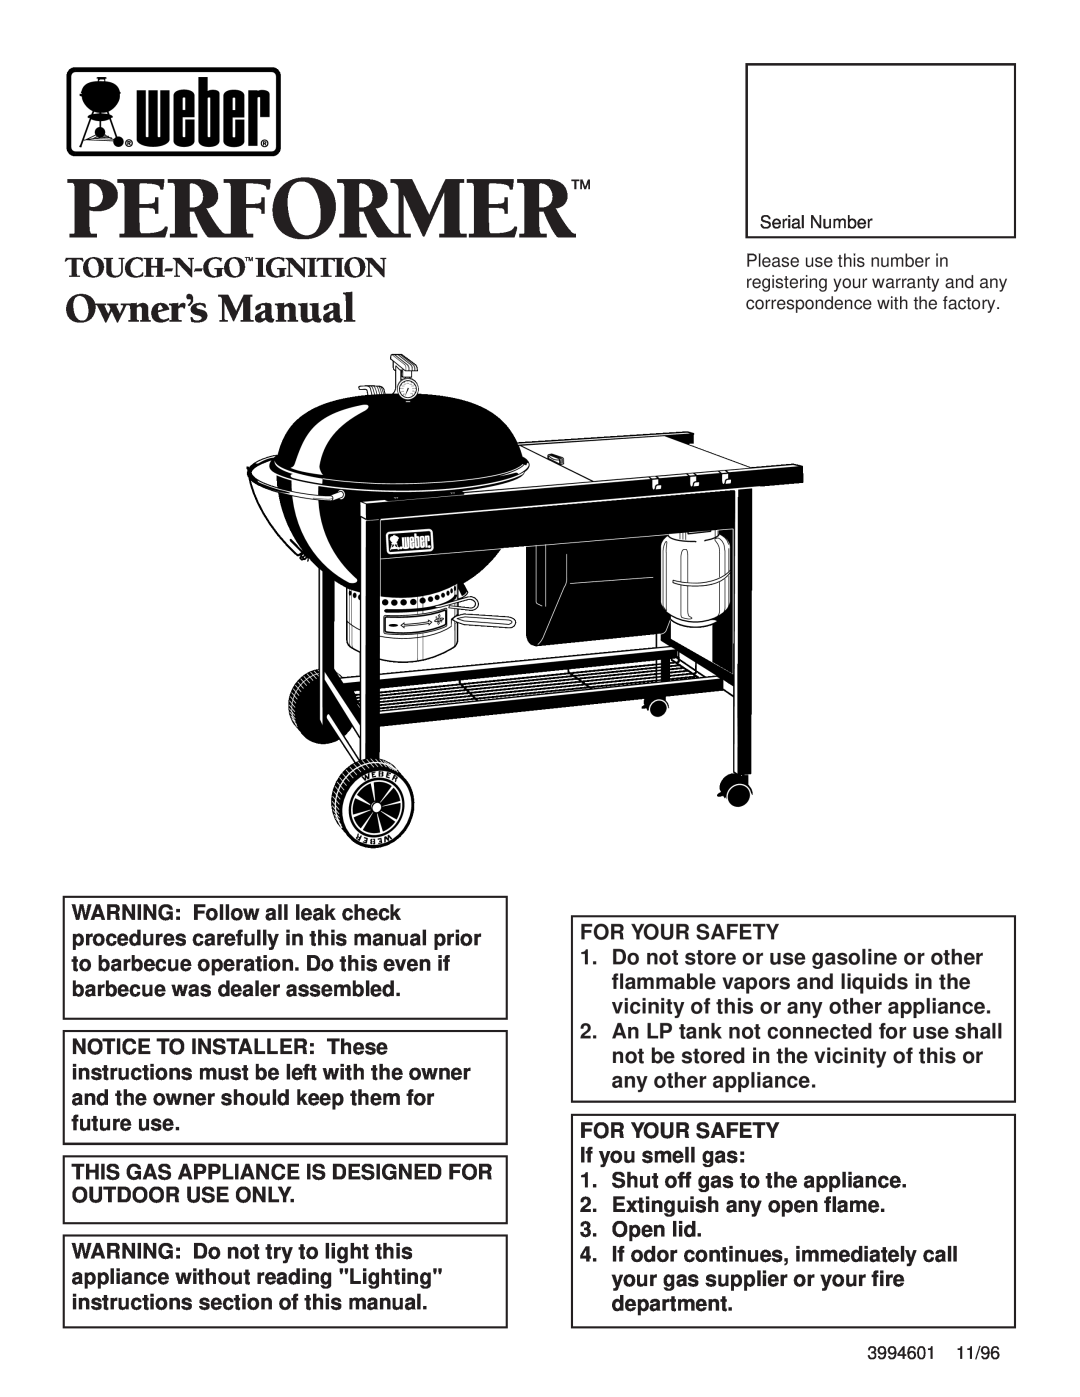 Weber Burner owner manual Performer, Touch-N-Go Ignition, For Your Safety, FOR YOUR SAFETY If you smell gas 